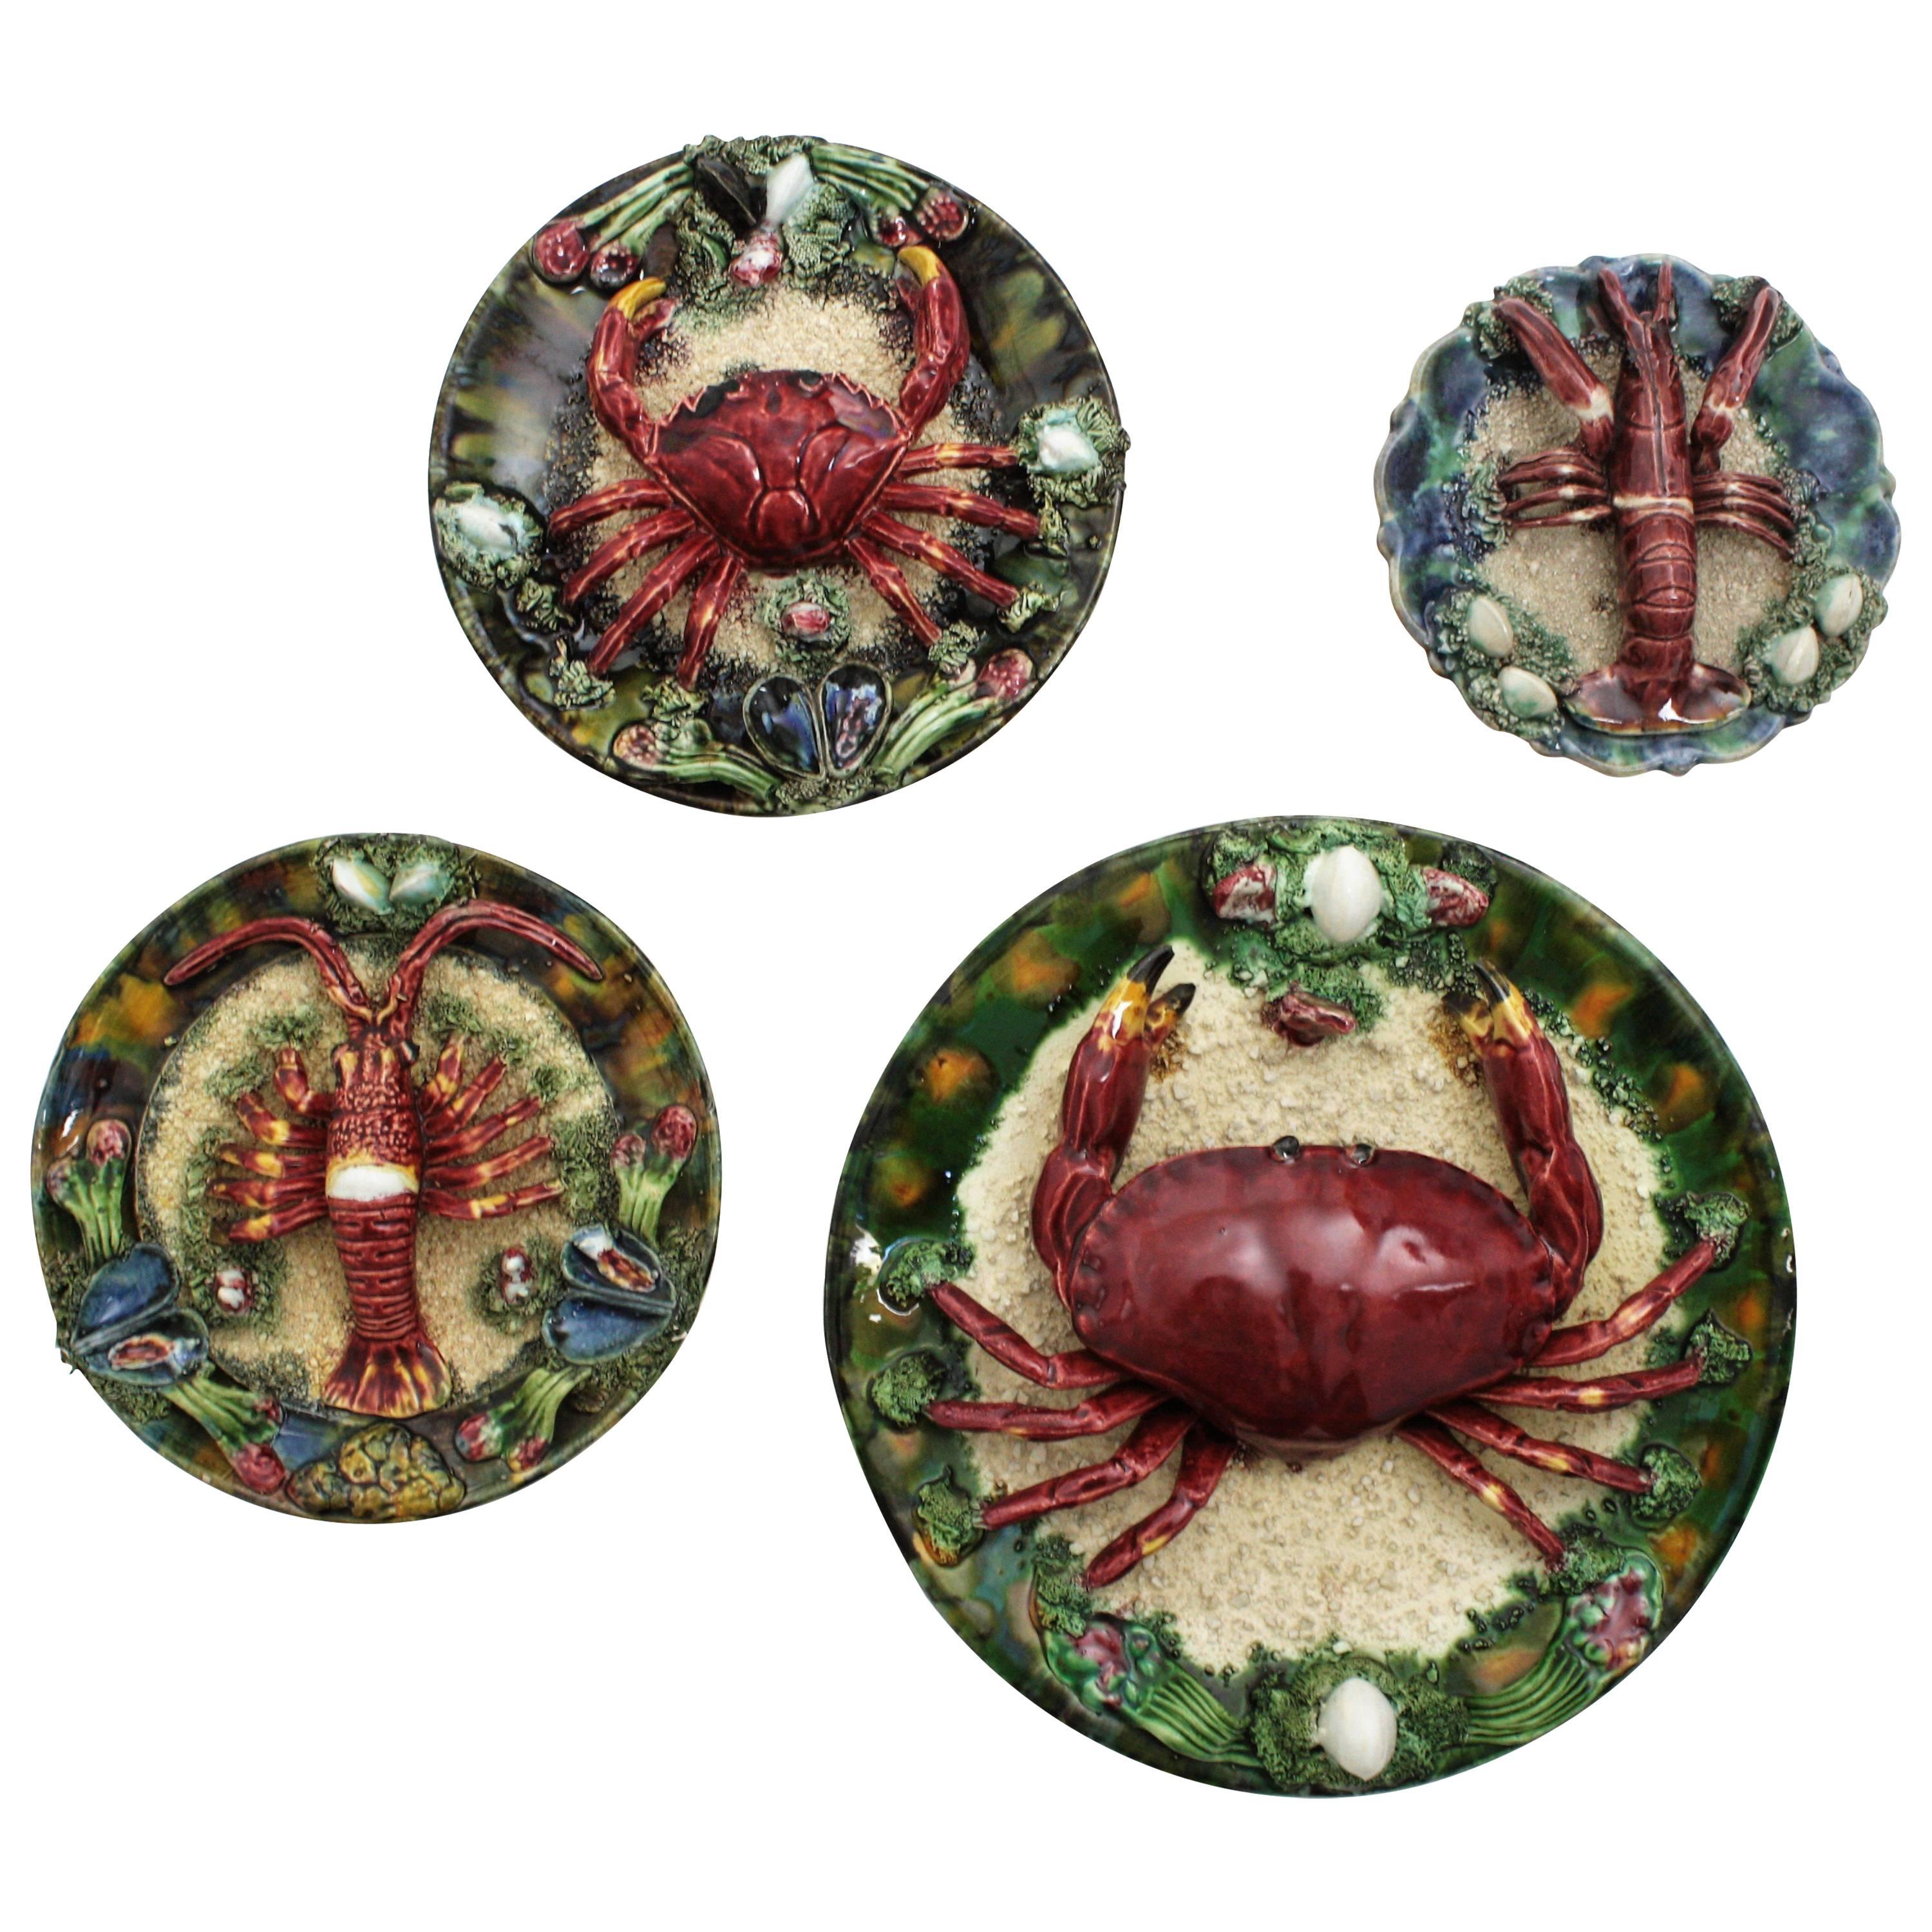 20th Century Majolica Trompe L'oeil Seafood Plates Wall Composition, Portugal, 1950s